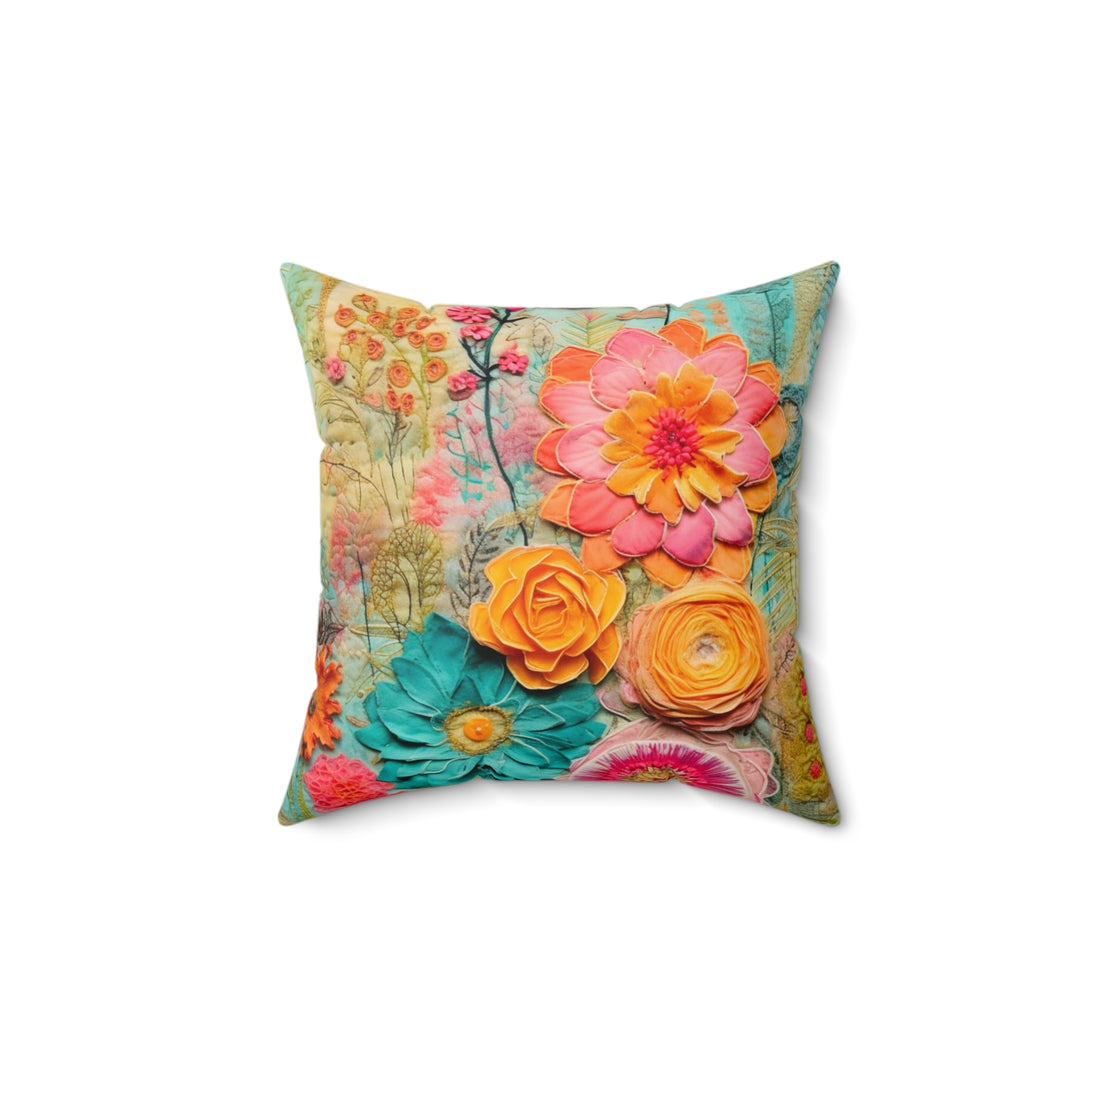 Floral Boho Pillow, Reversible, Flower, Butterfly, Bohemian Hippie, Retro Faux Embroidered Pillow And Insert